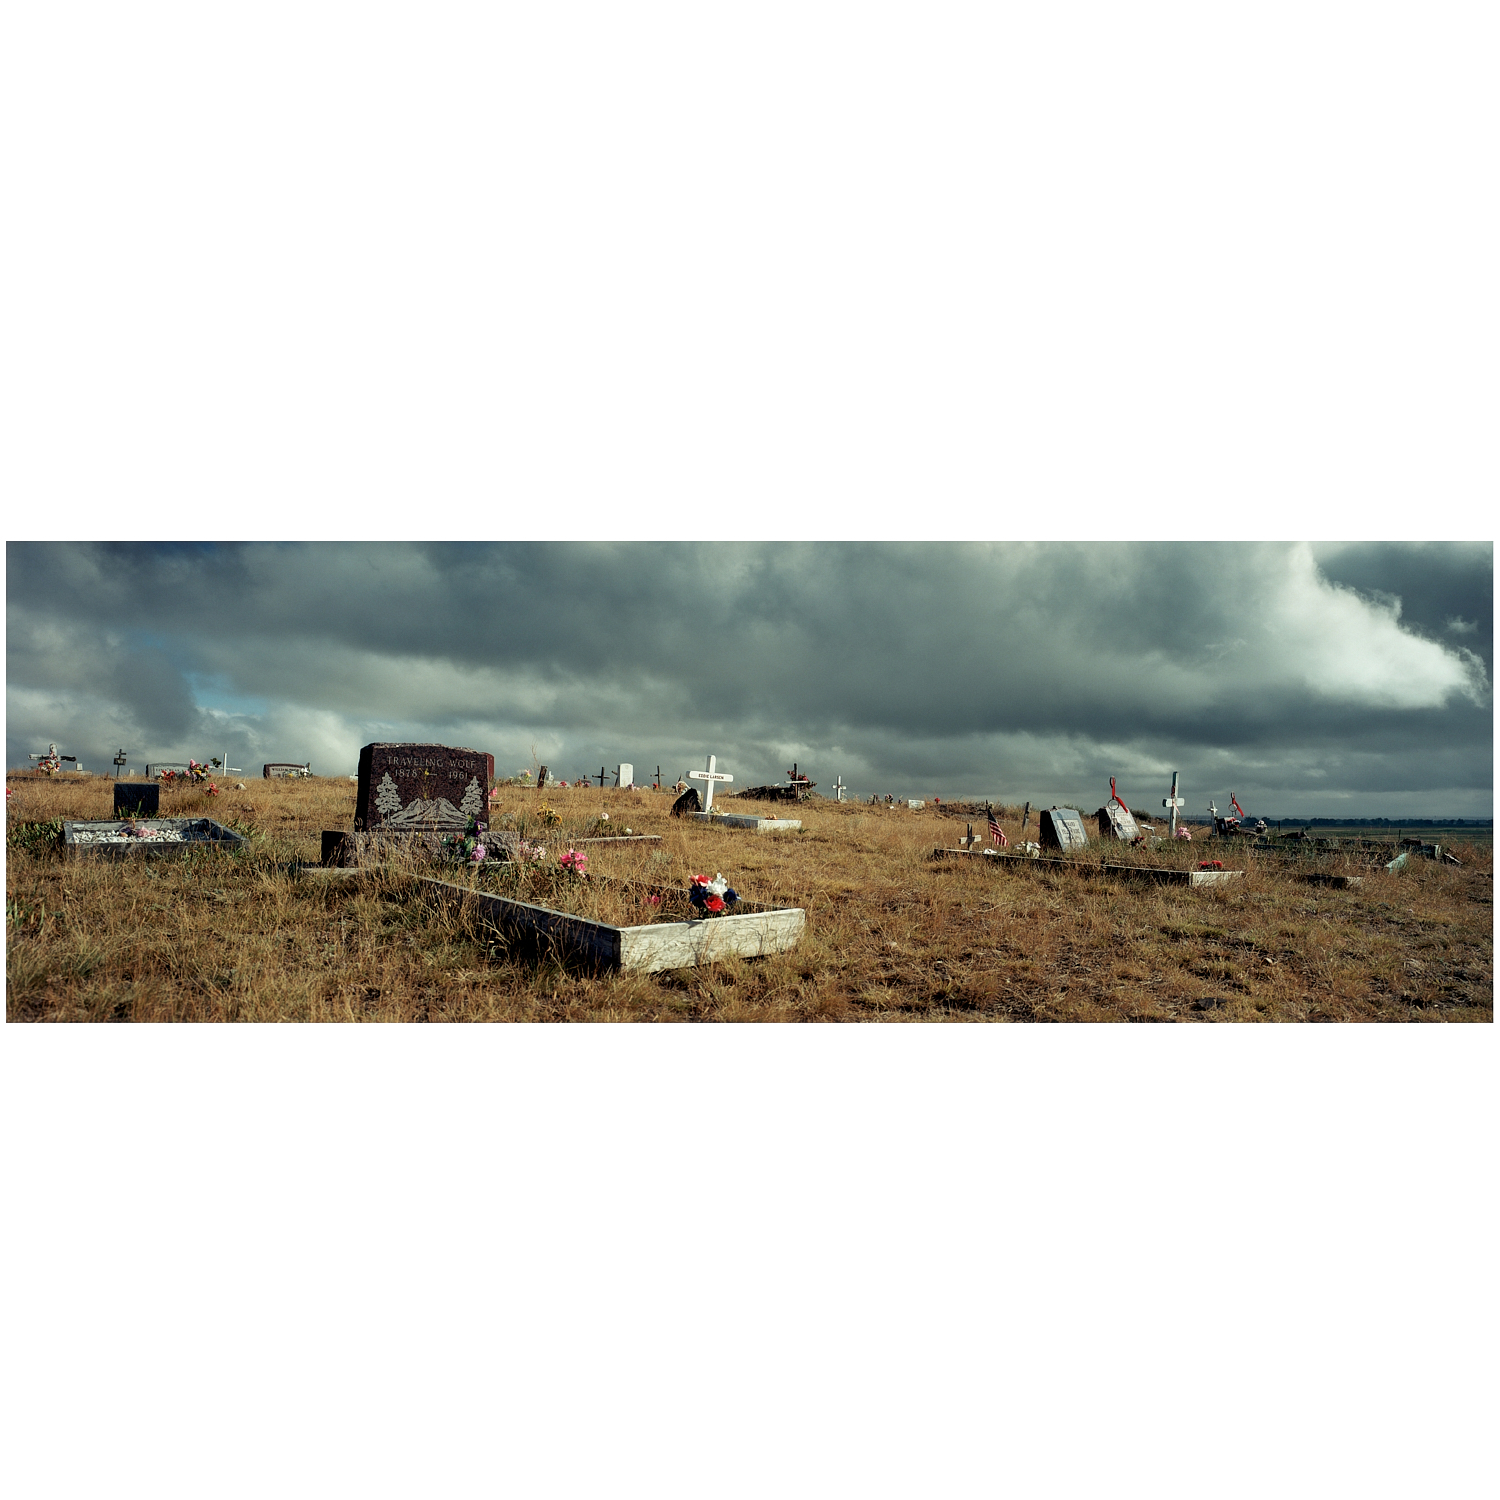 WIM WENDERS, LARGE SCALE PHOTOGRAPH,